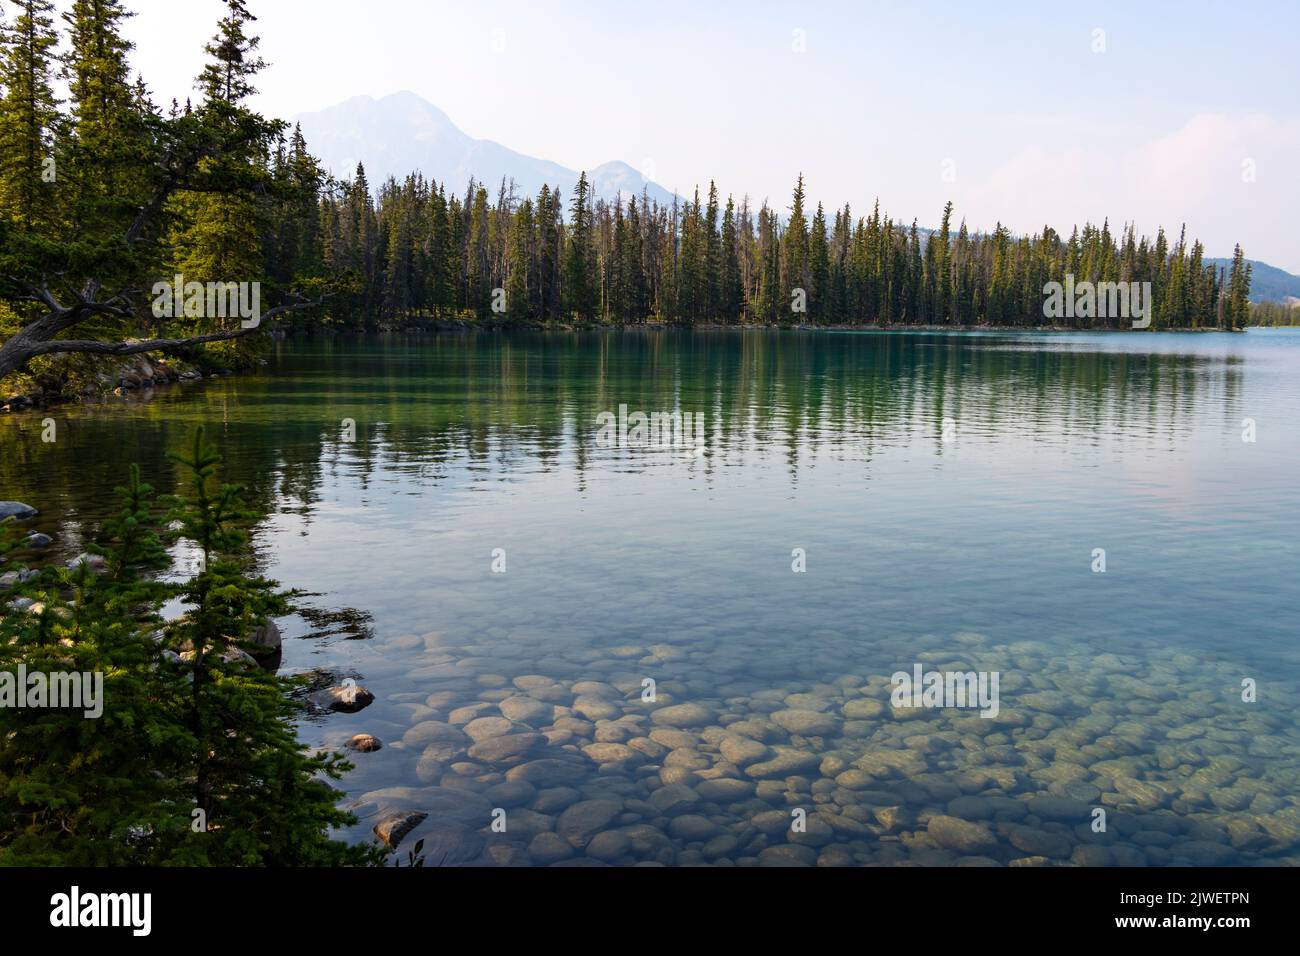 clear calm lake with mountains far off in distance Stock Photo